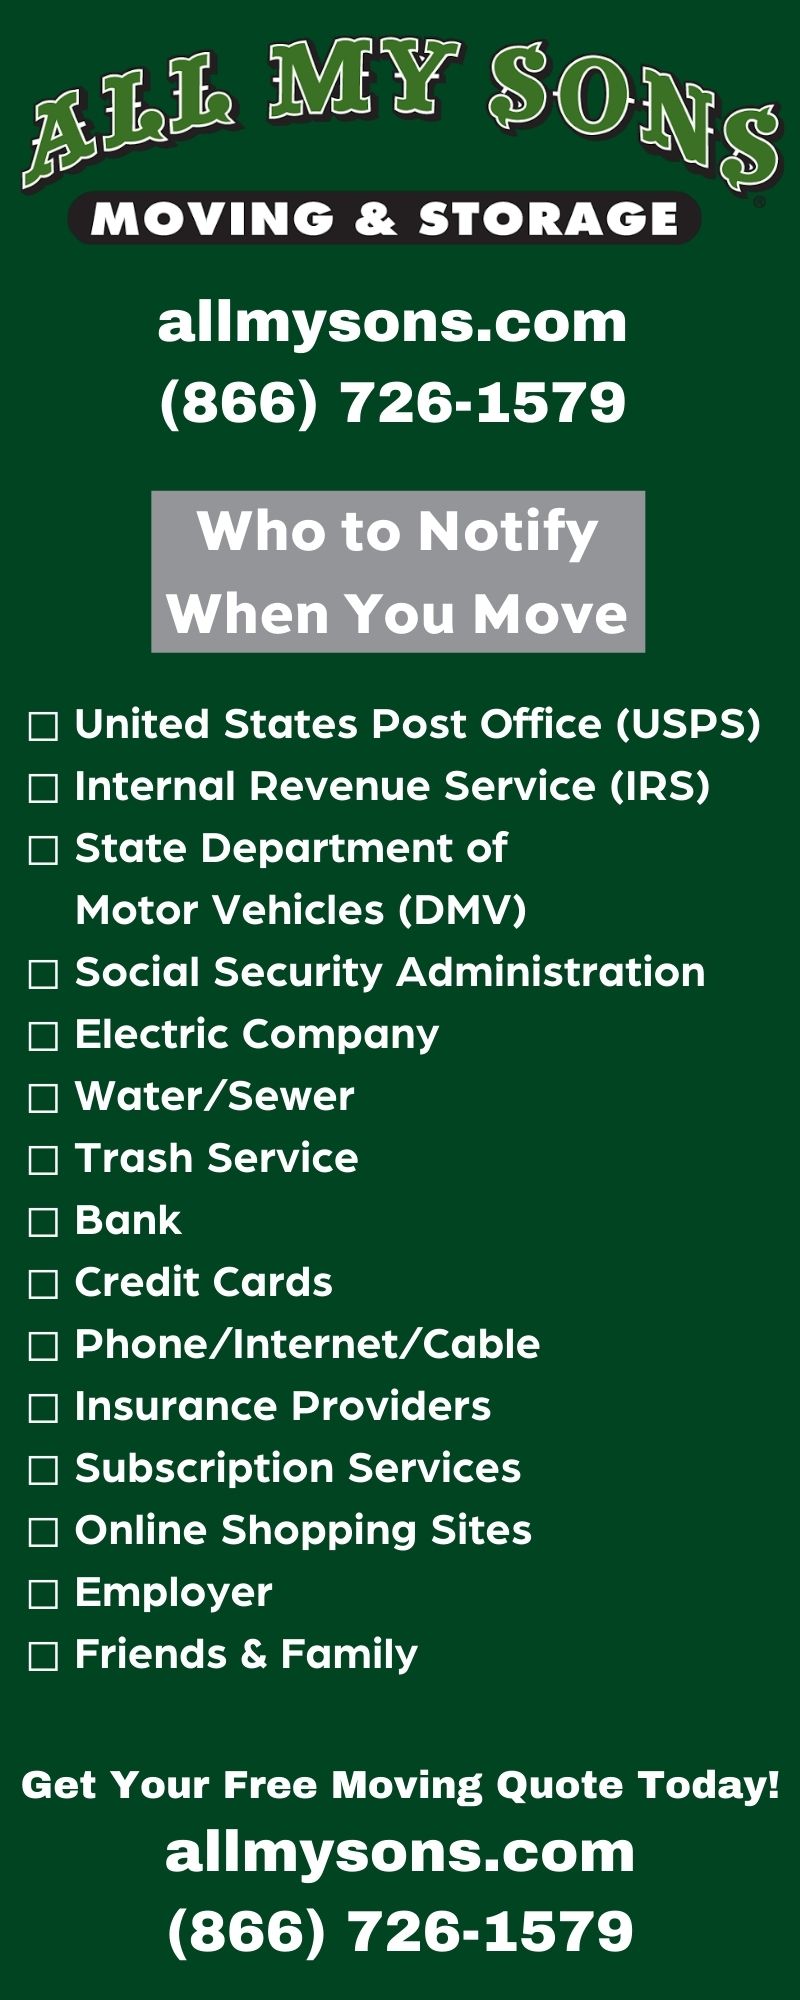 Who to Notify When You Move